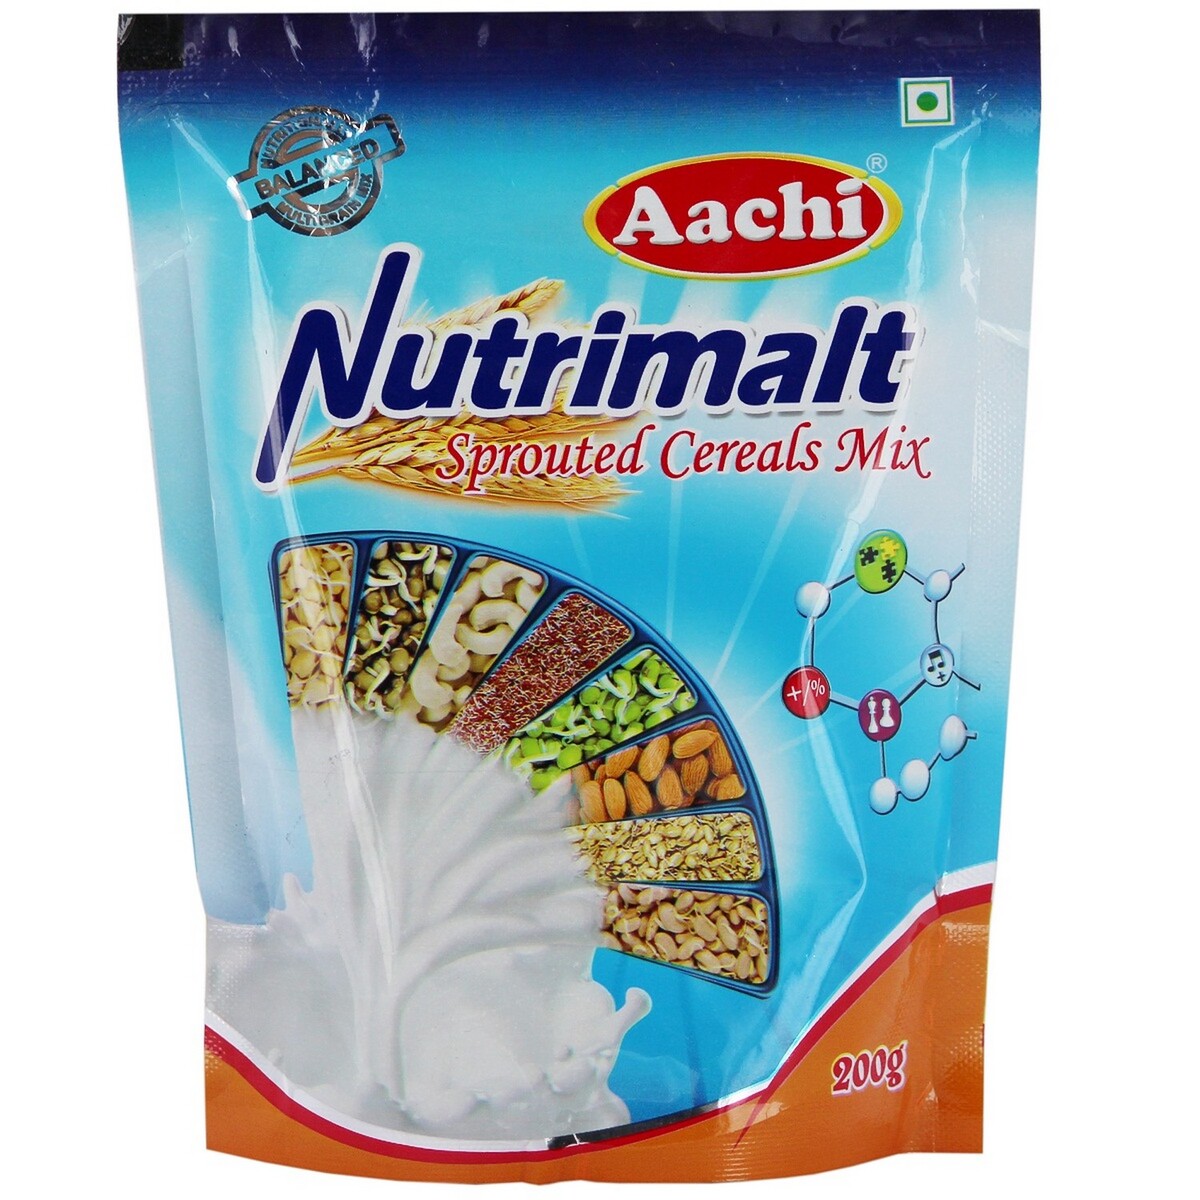 Aachi Nutrimalt Sprouted Cereals Mix 200g